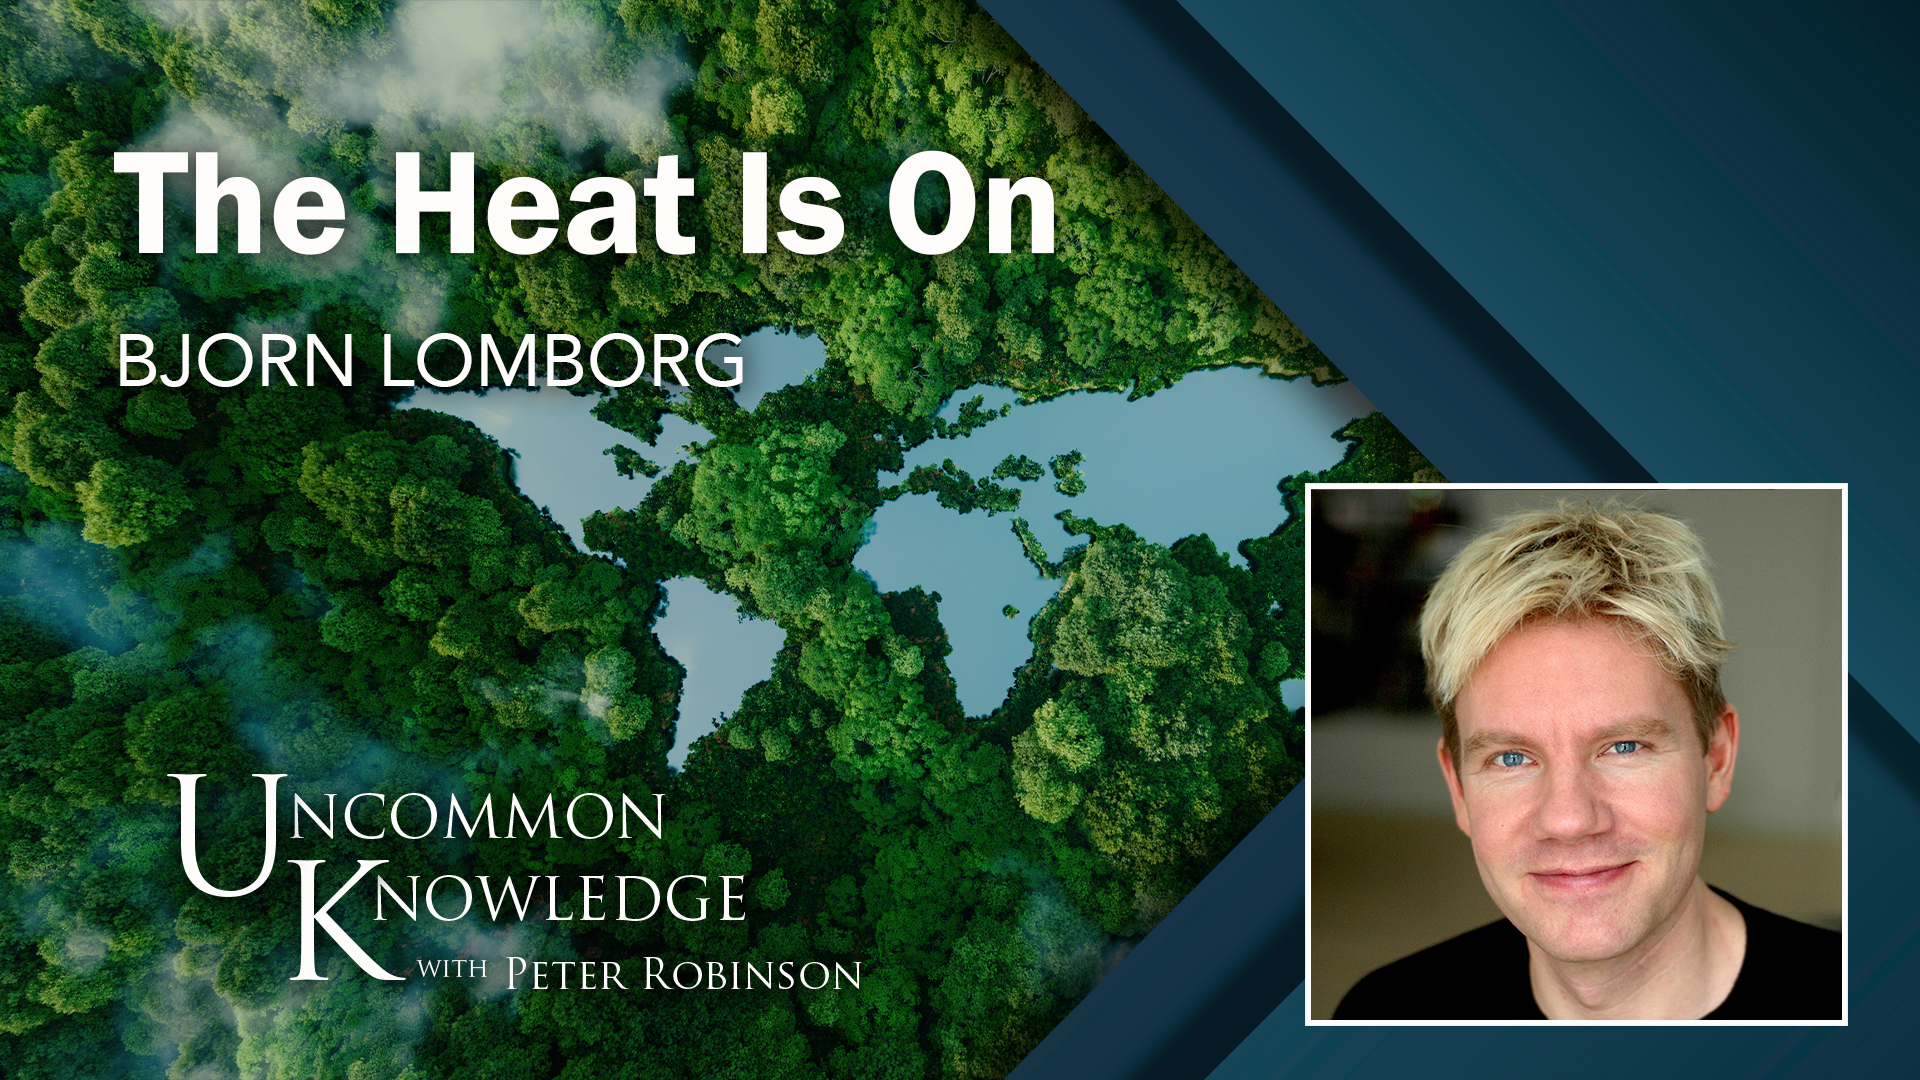 image for The Heat Is On: Bjorn Lomborg on the Summer’s Record Heat